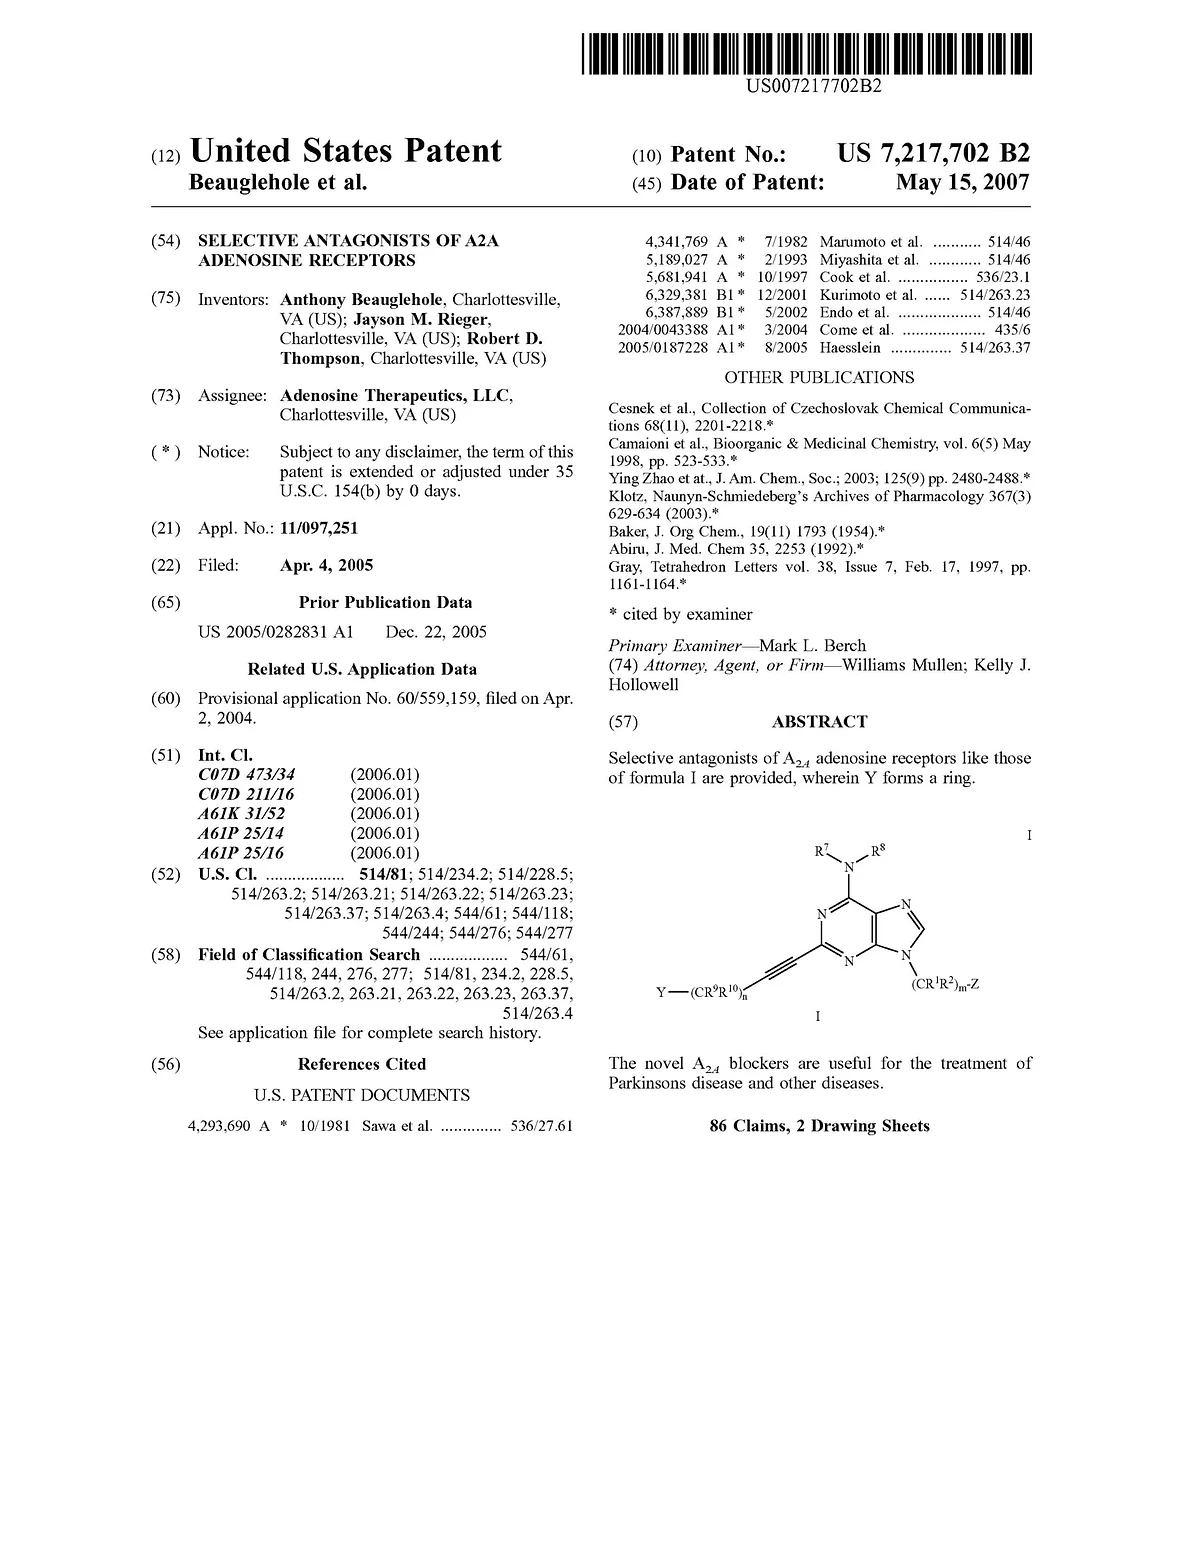 Chemical Patents